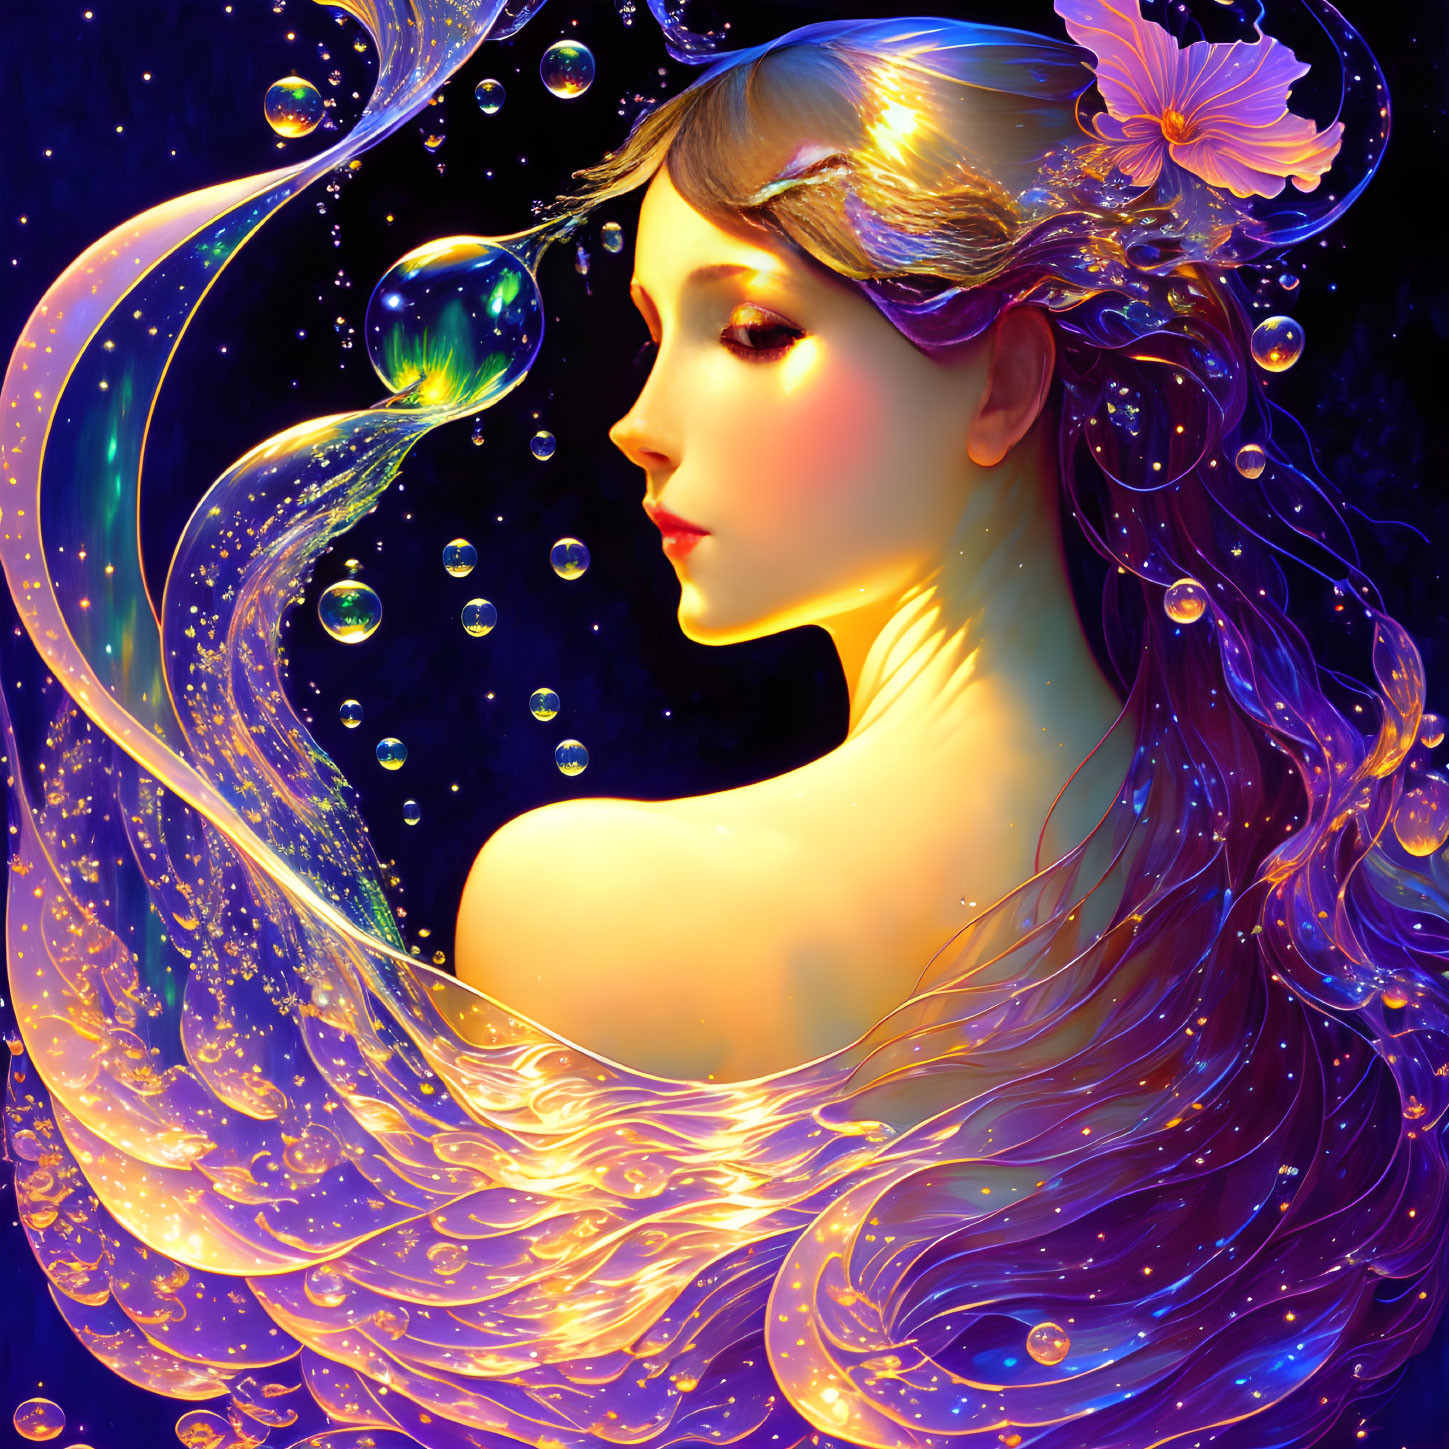 Fantastical portrait of woman with flowing hair, light, bubbles, and flower on cosmic background